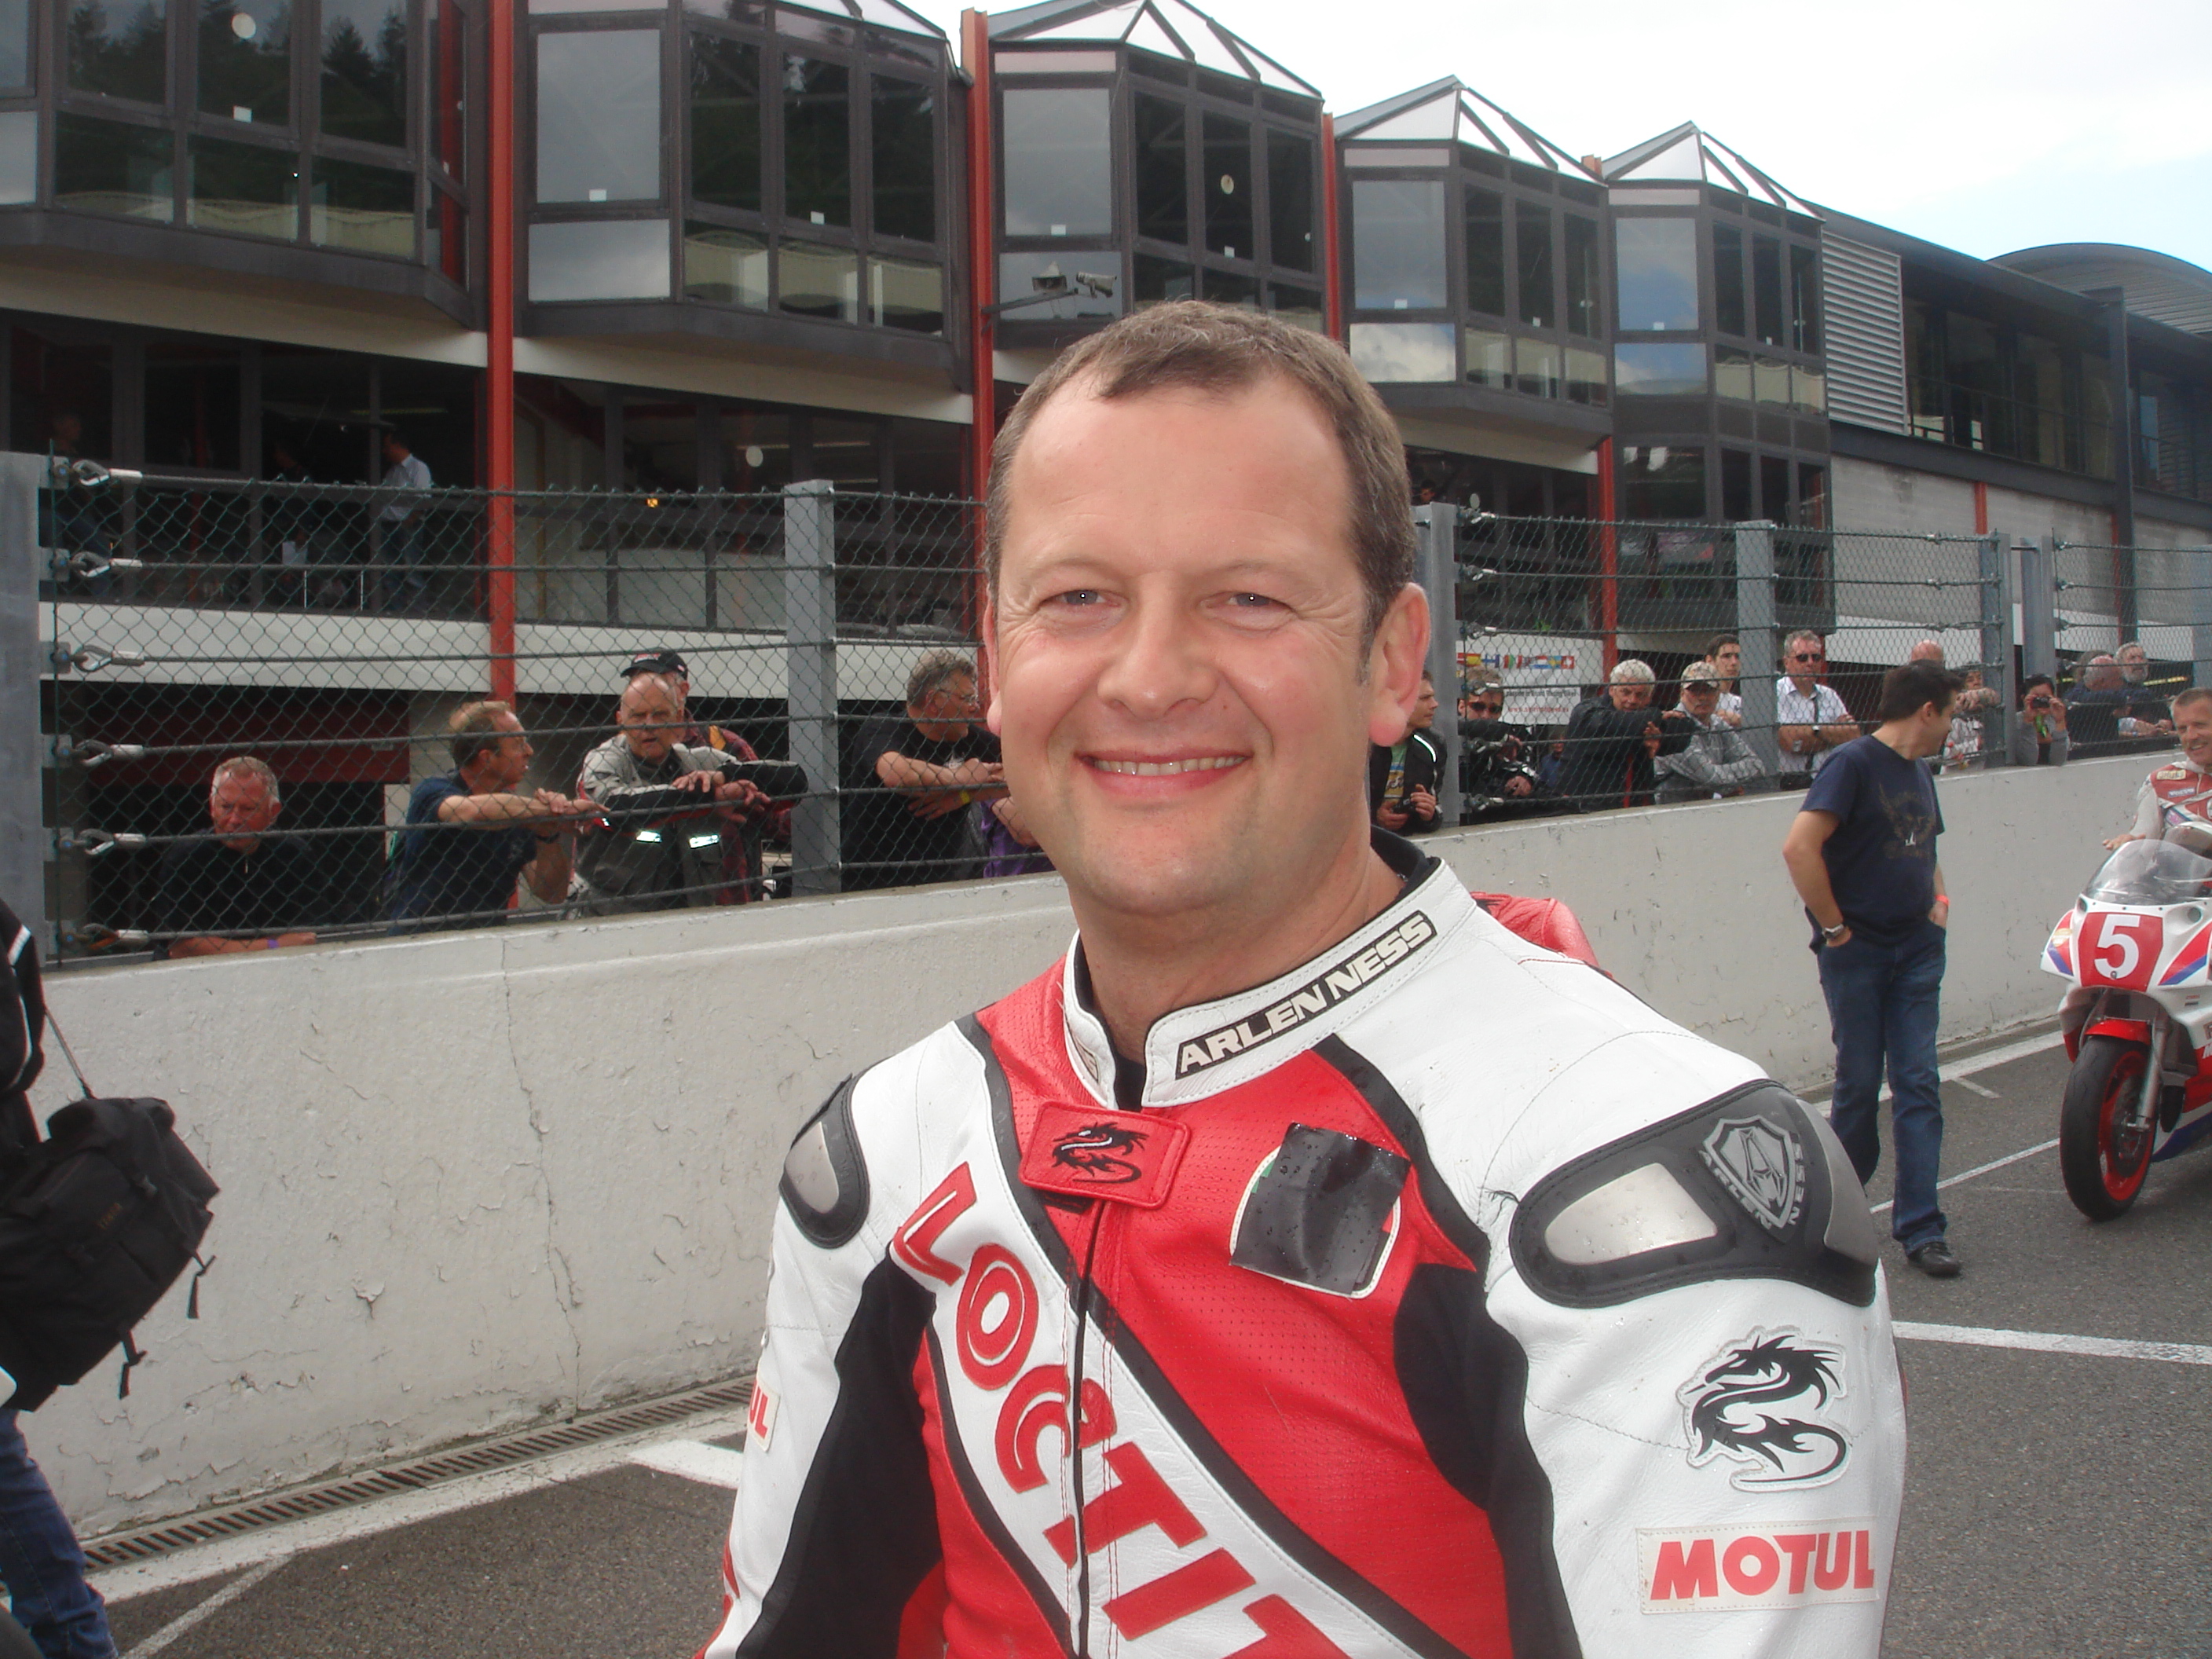 Terry Rymer joins GTC Motorcycle